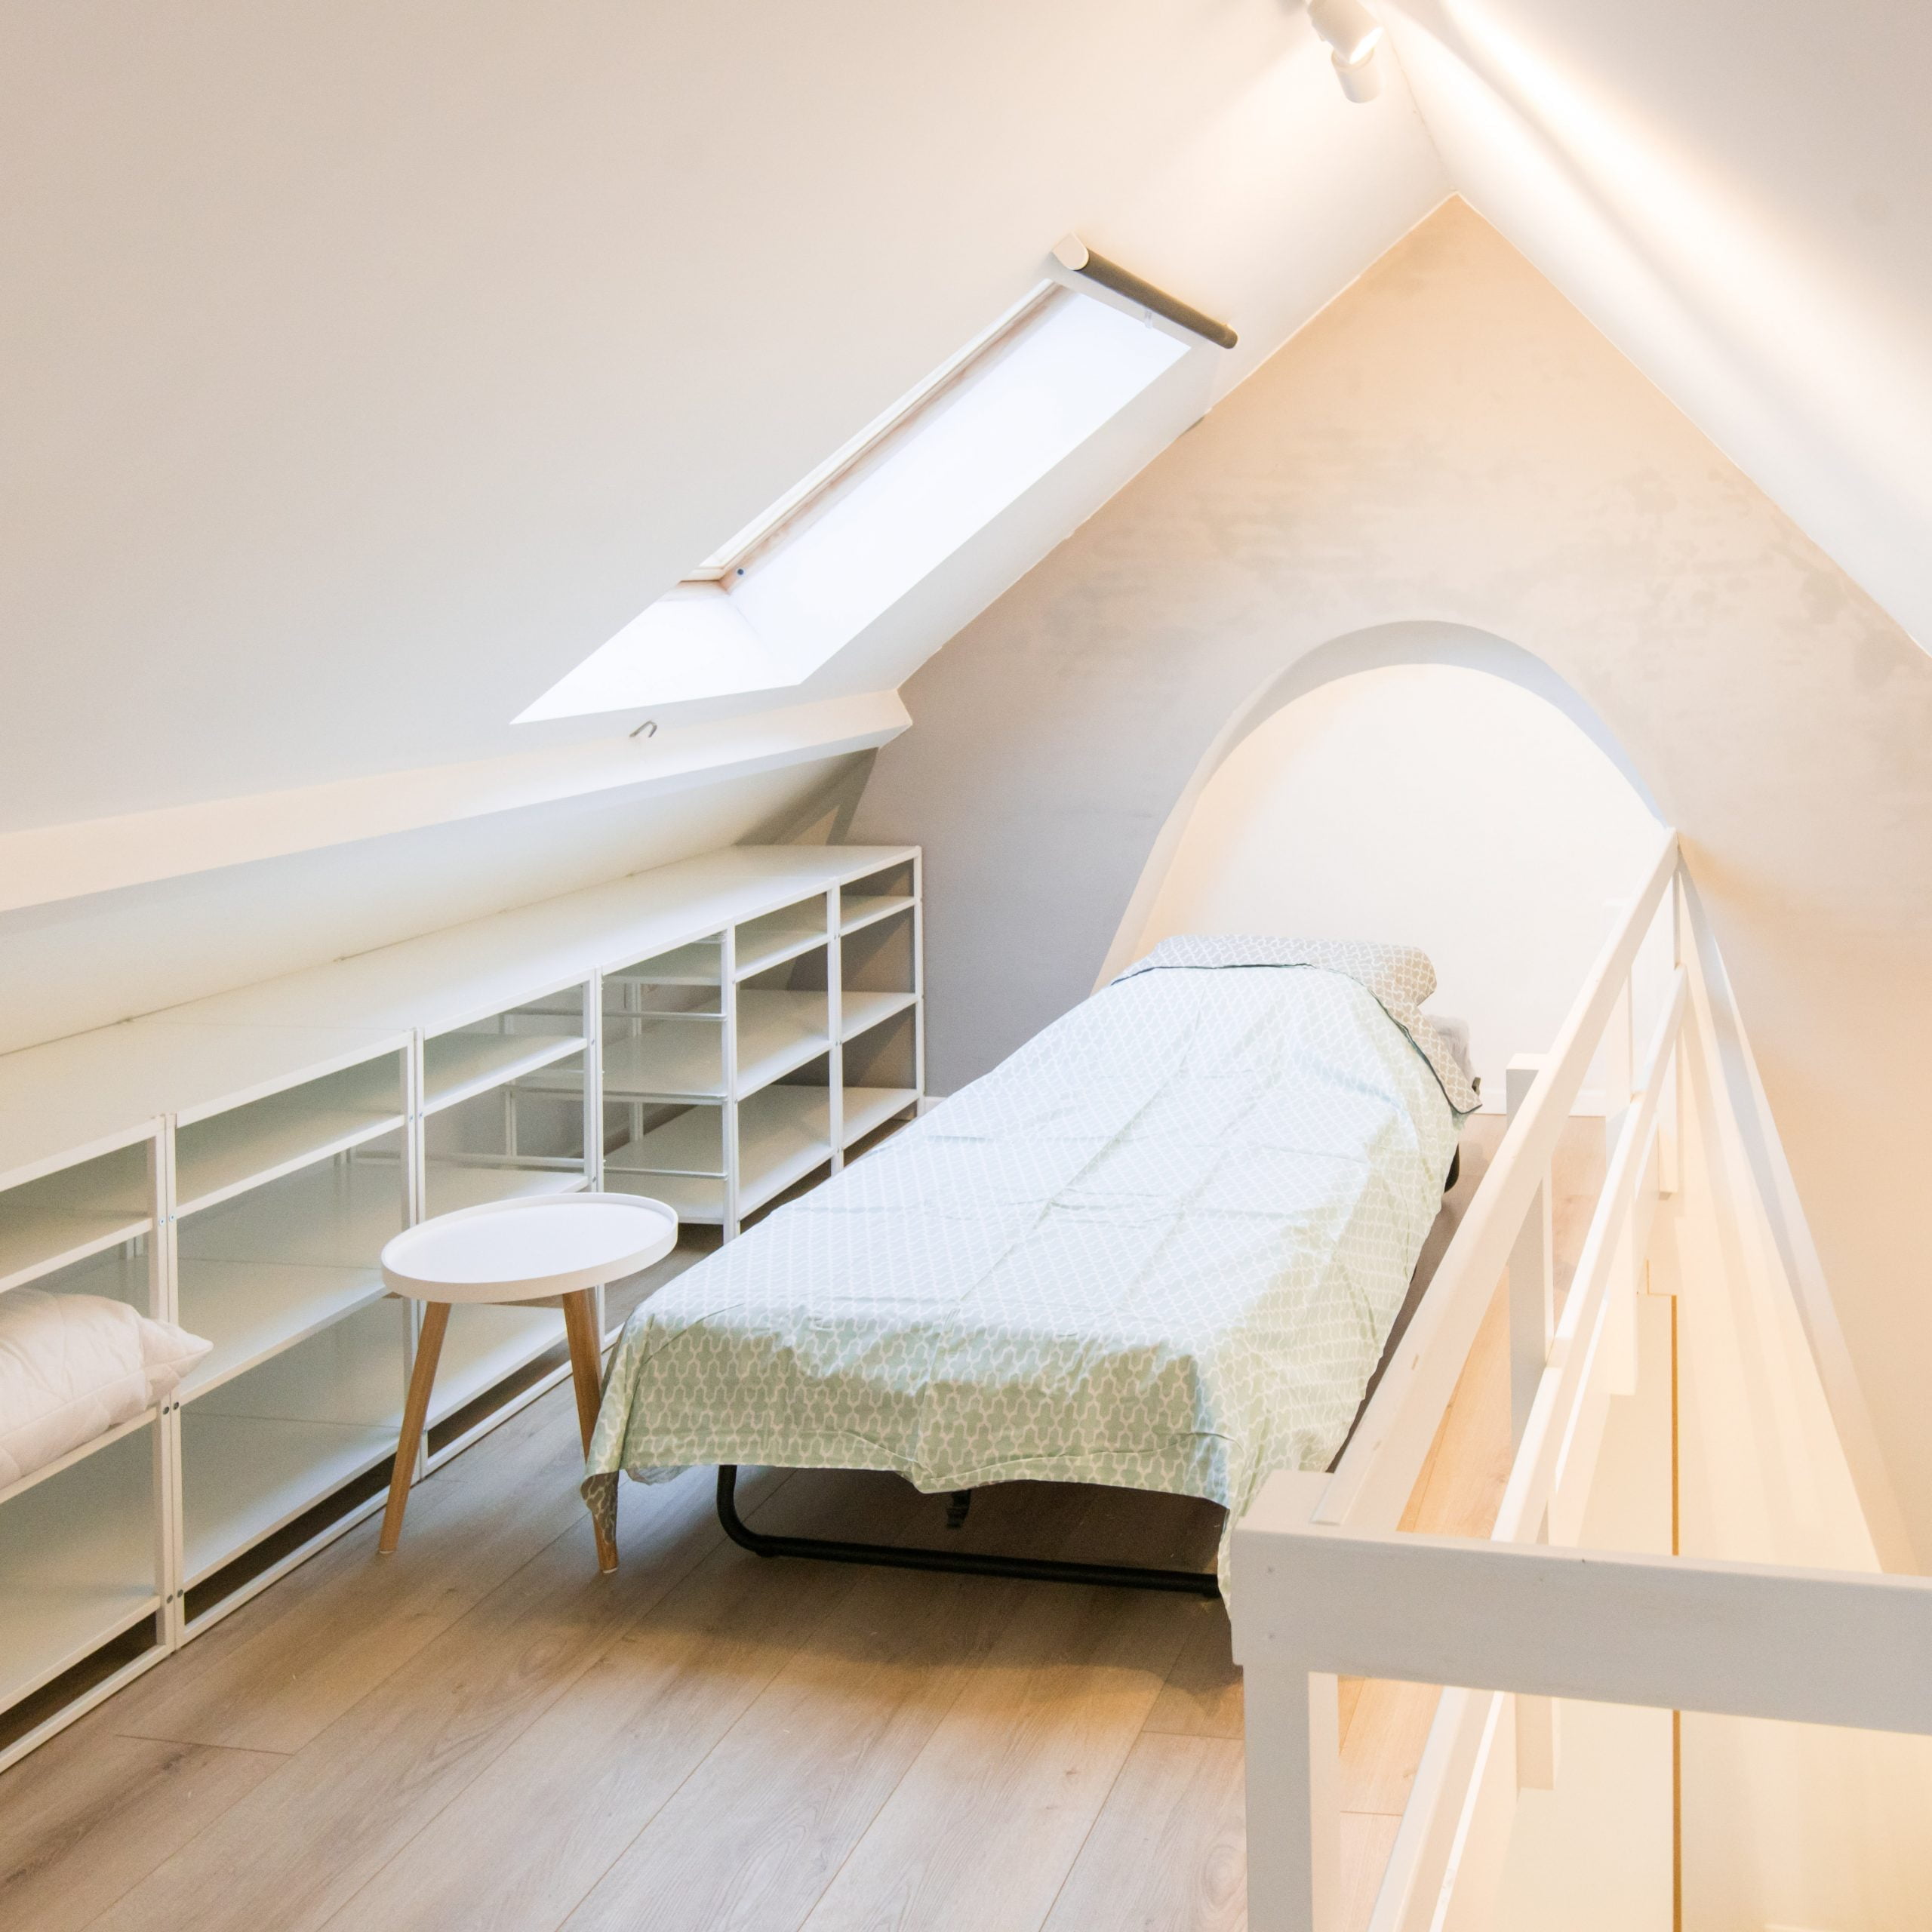 Rooftop apartment in Antwerp for expats